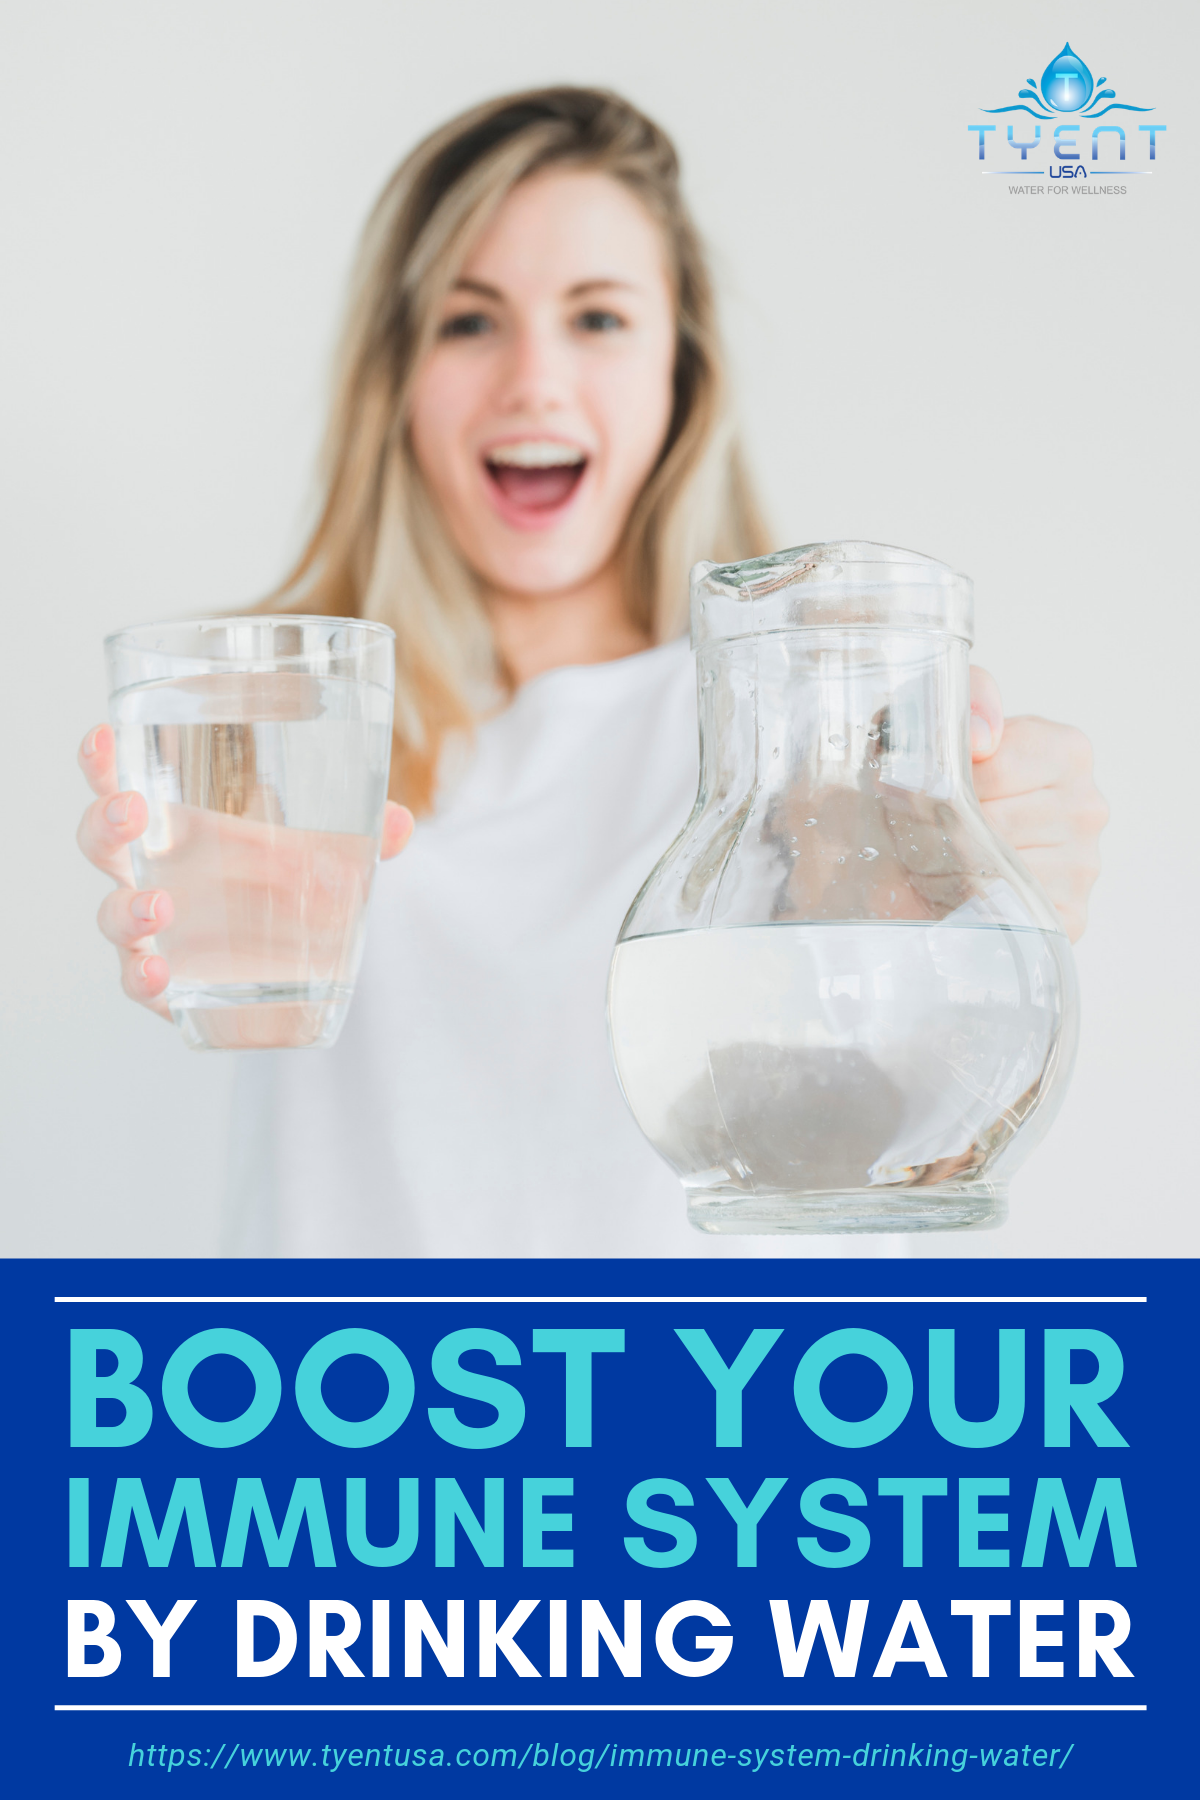 Boost Your Immune System By Drinking Water https://www.tyentusa.com/blog/immune-system-drinking-water/